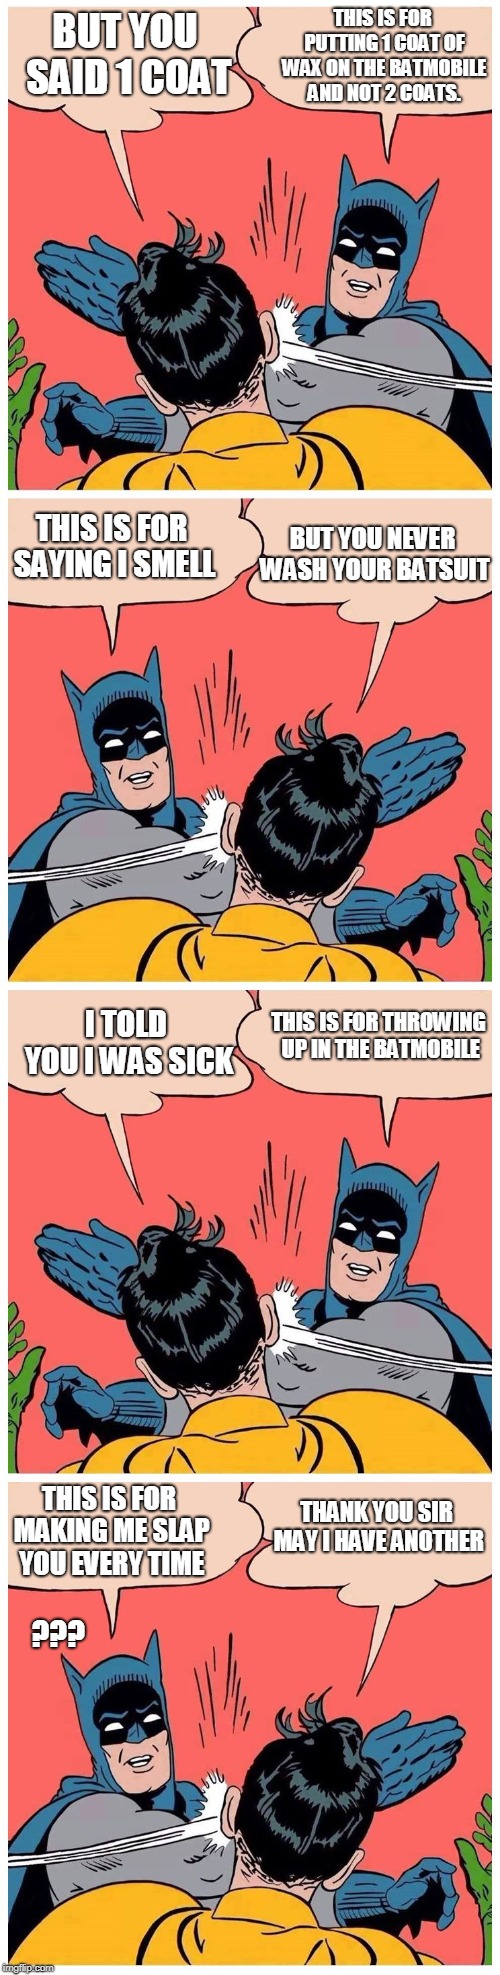 Batman slaps robin again and again | BUT YOU SAID 1 COAT; THIS IS FOR PUTTING 1 COAT OF WAX ON THE BATMOBILE AND NOT 2 COATS. THIS IS FOR SAYING I SMELL; BUT YOU NEVER WASH YOUR BATSUIT; THIS IS FOR THROWING UP IN THE BATMOBILE; I TOLD YOU I WAS SICK; THANK YOU SIR MAY I HAVE ANOTHER; THIS IS FOR MAKING ME SLAP YOU EVERY TIME; ??? | image tagged in batman slaps robin again and again | made w/ Imgflip meme maker